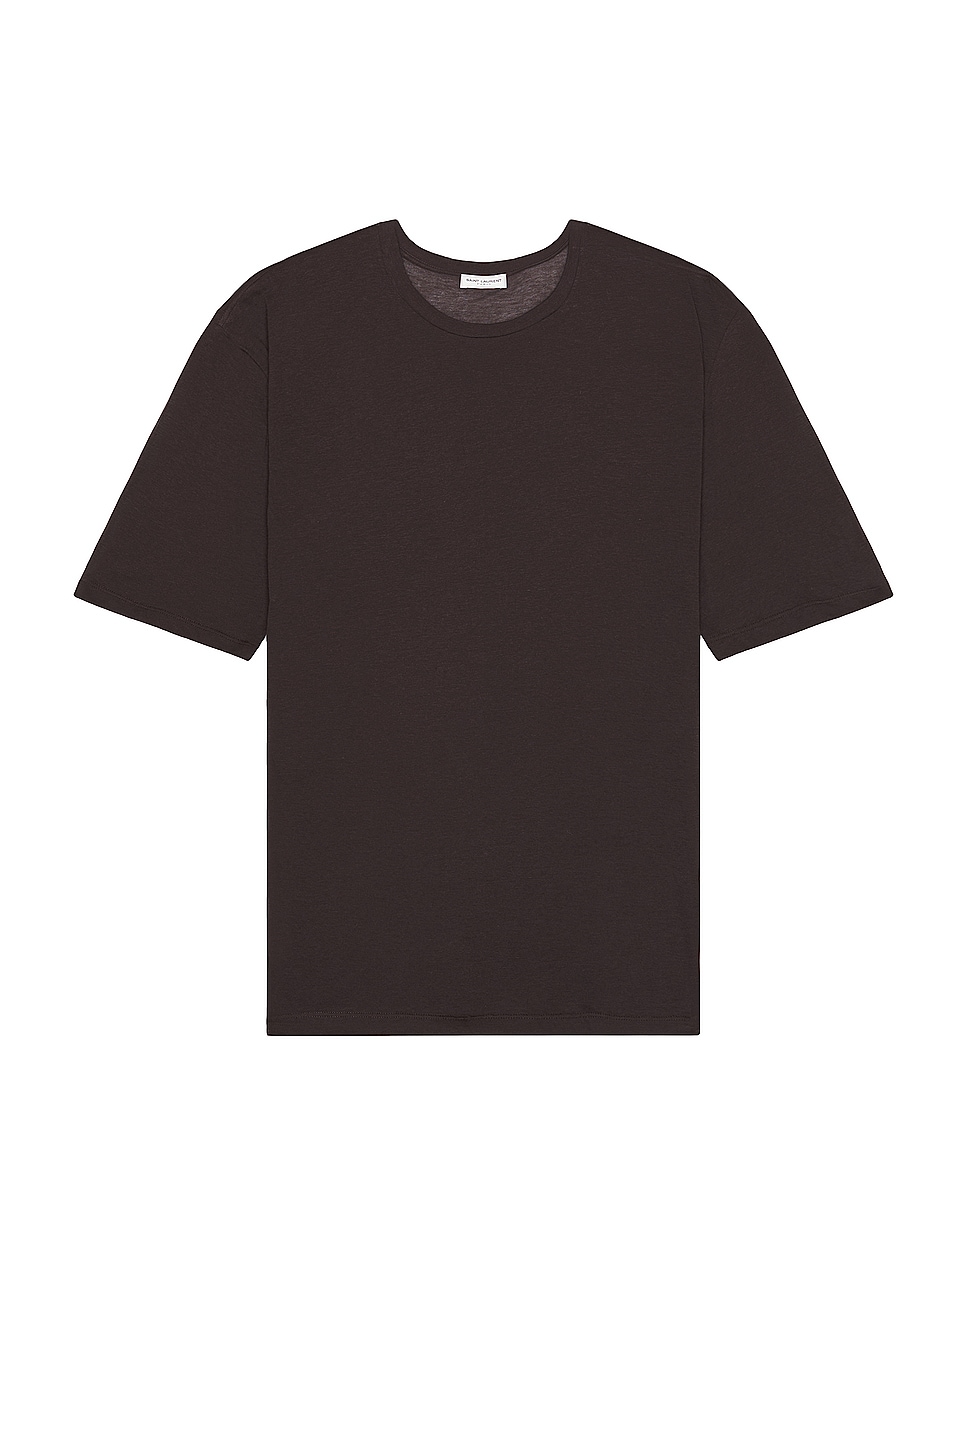 Image 1 of Saint Laurent T-shirt Loose in Cacao